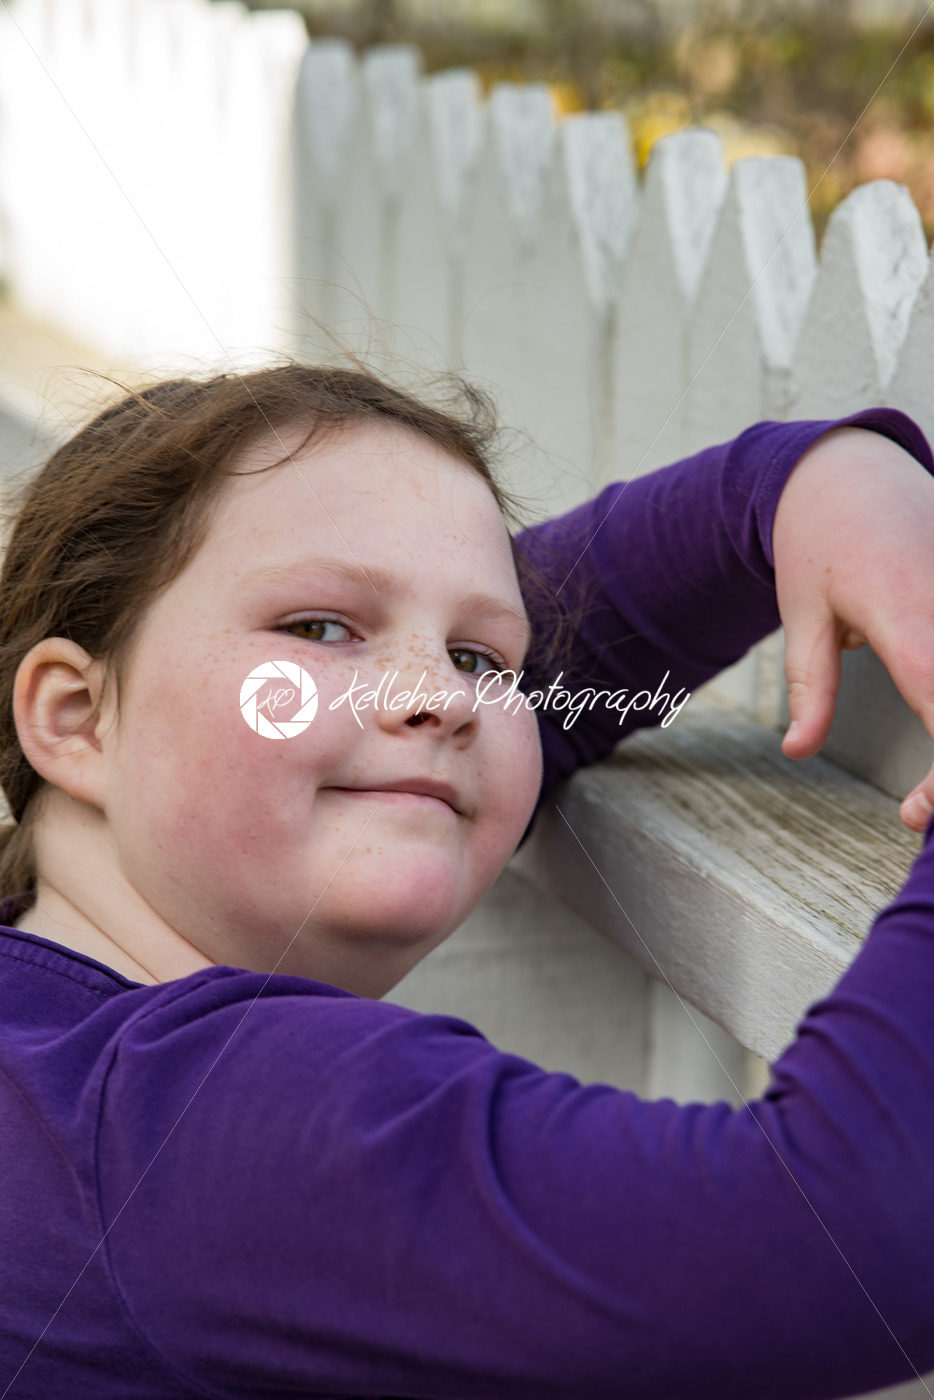 young girl posing leaning on picket fence - Kelleher Photography Store